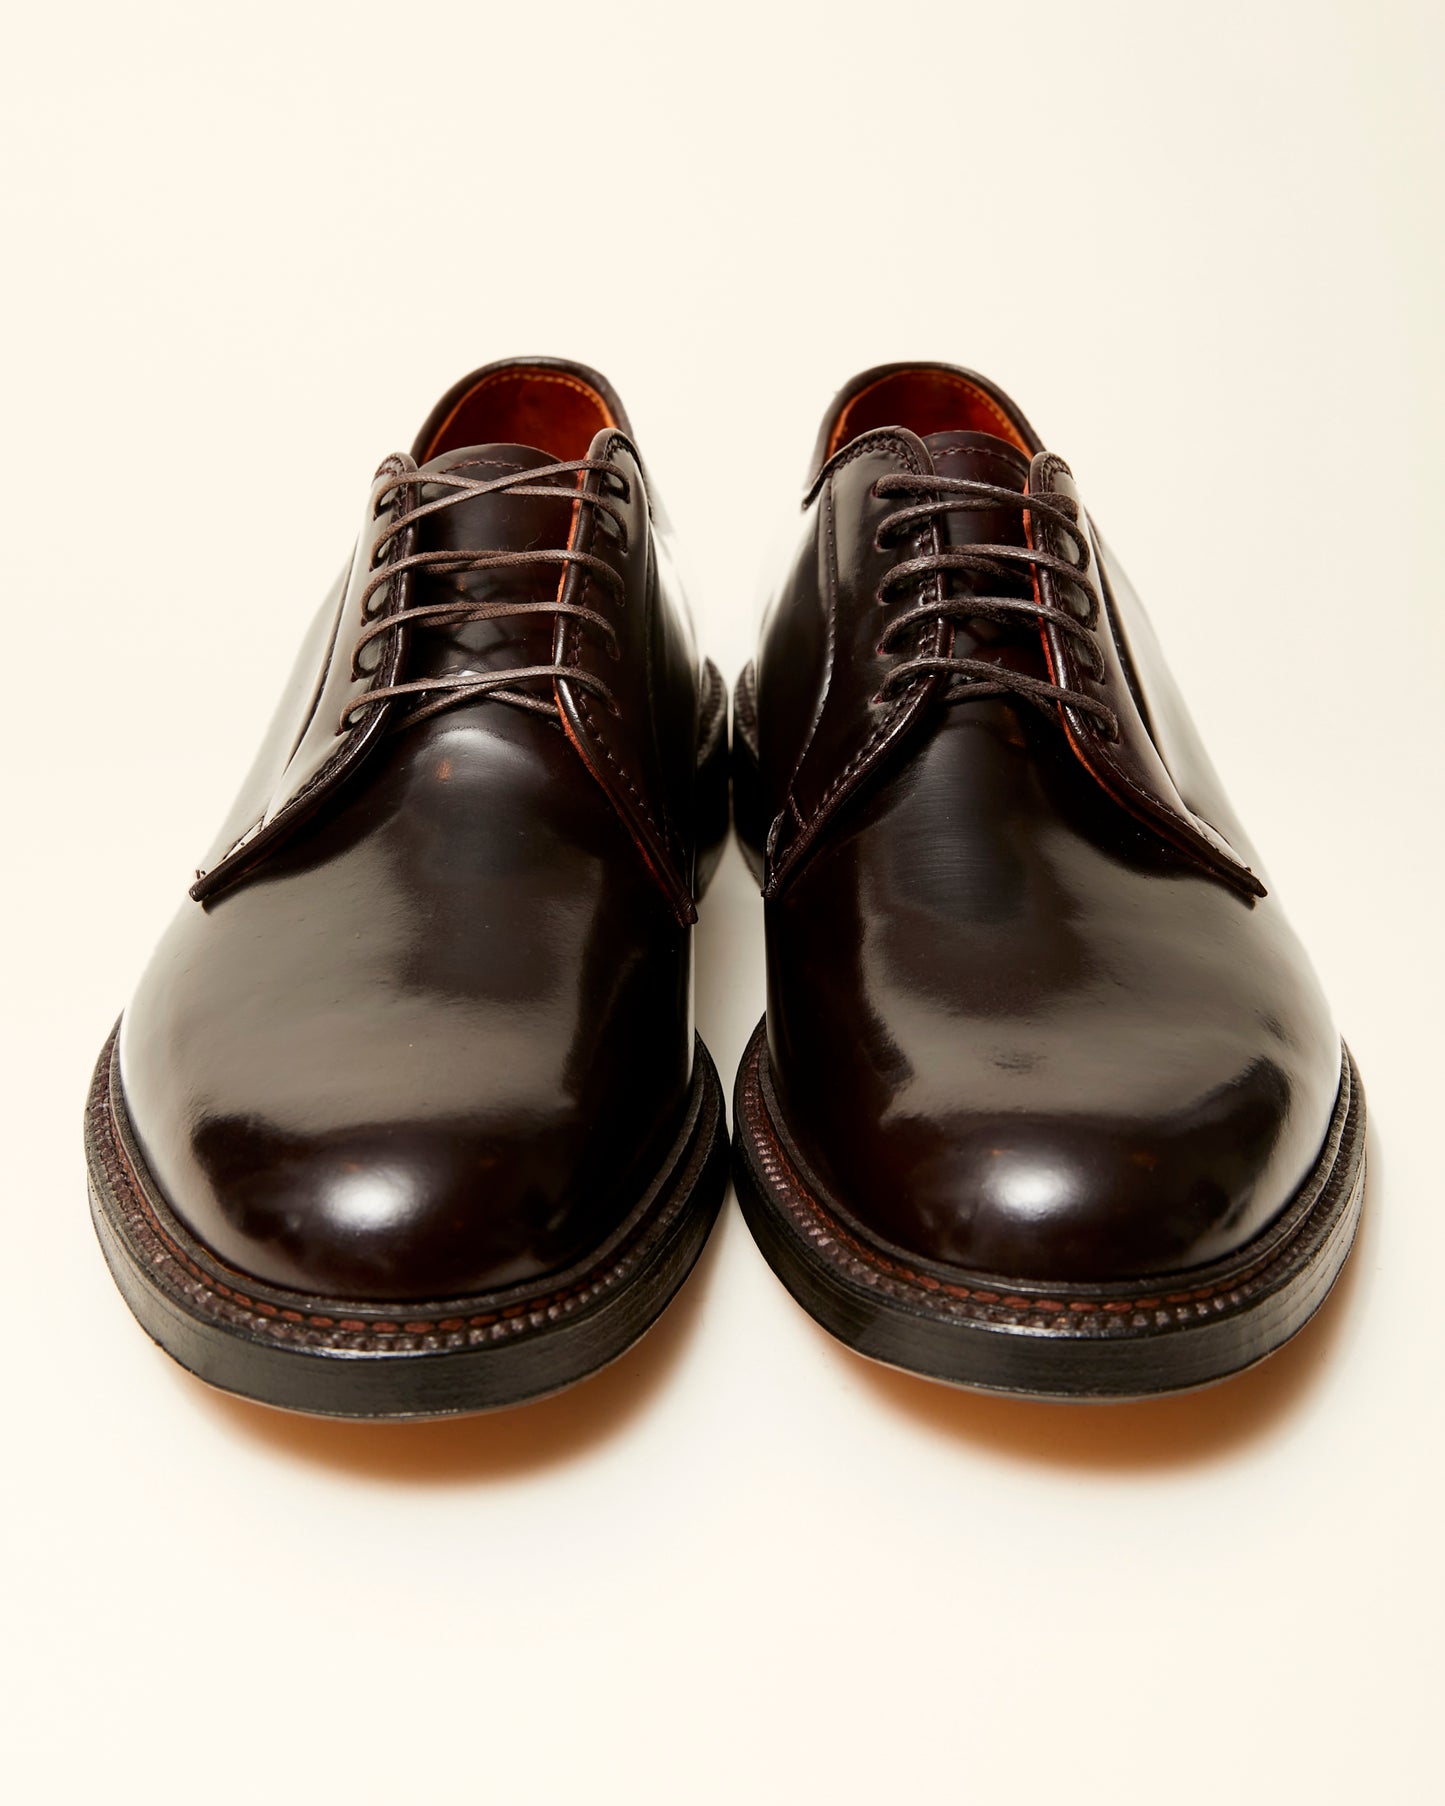 990 Plain Toe Blucher in Color 8 Shell Cordovan, Barrie Last